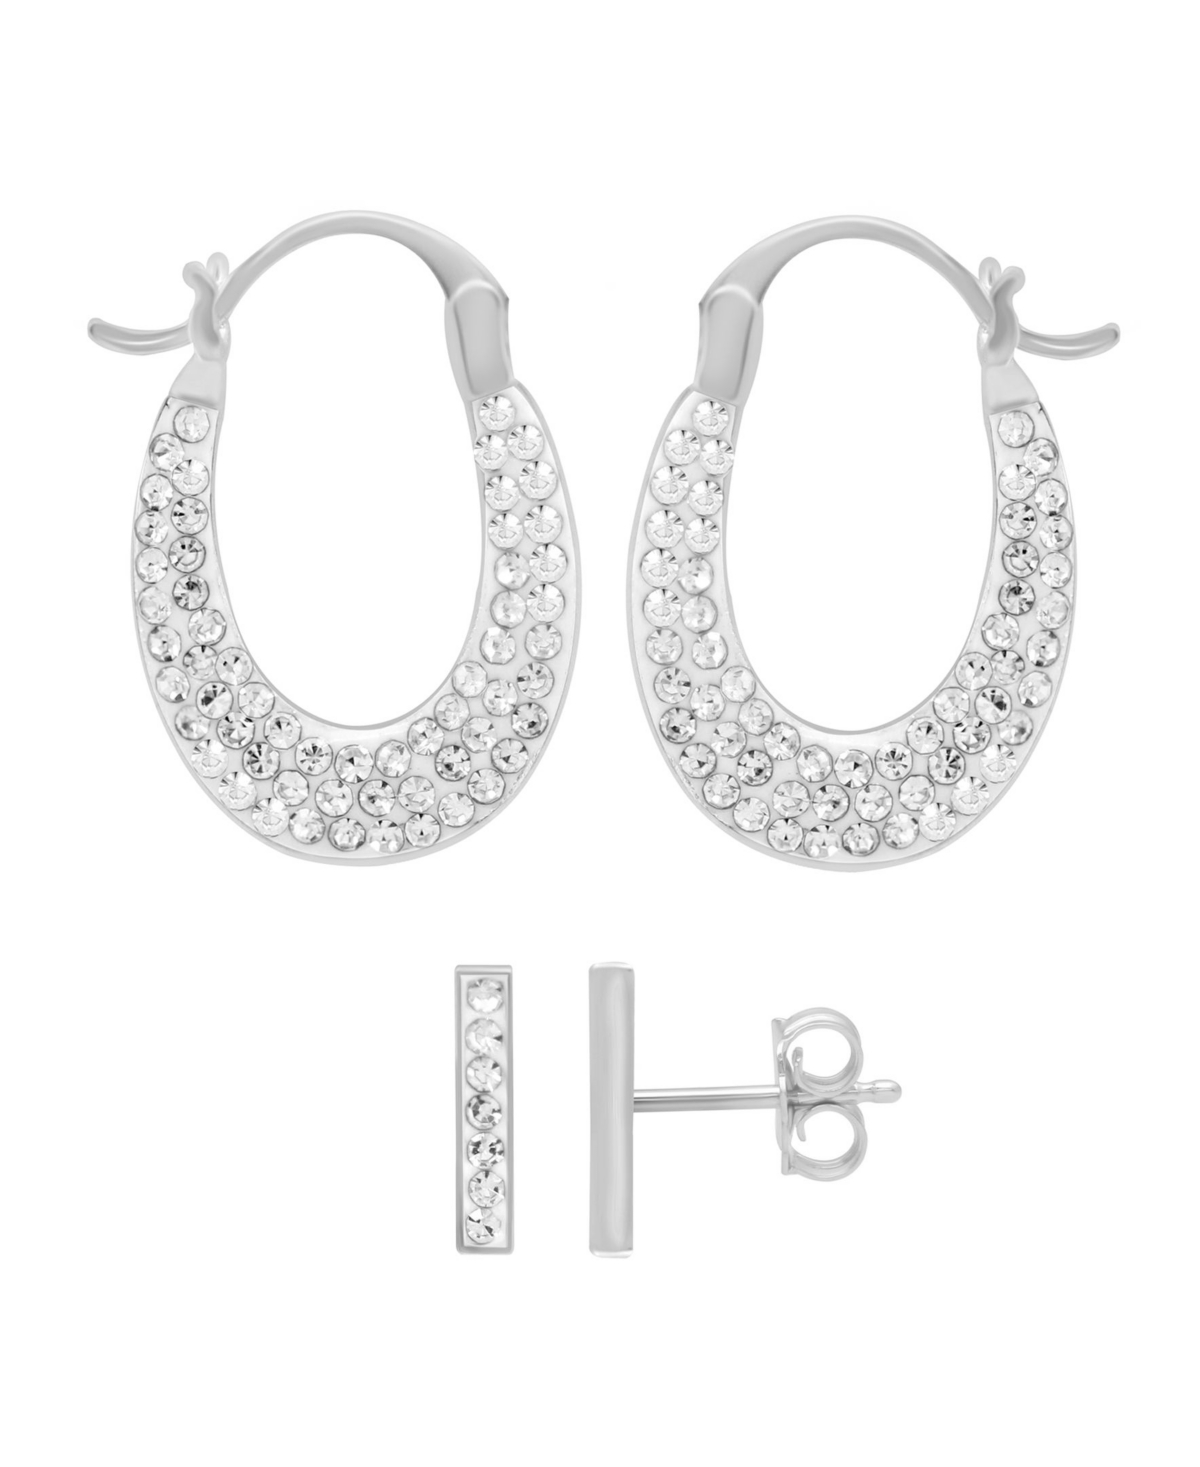 Crystal Bar Stud Pave Oval Hoop Duo Earring Set, Gold Plate and Silver Plate - Silver